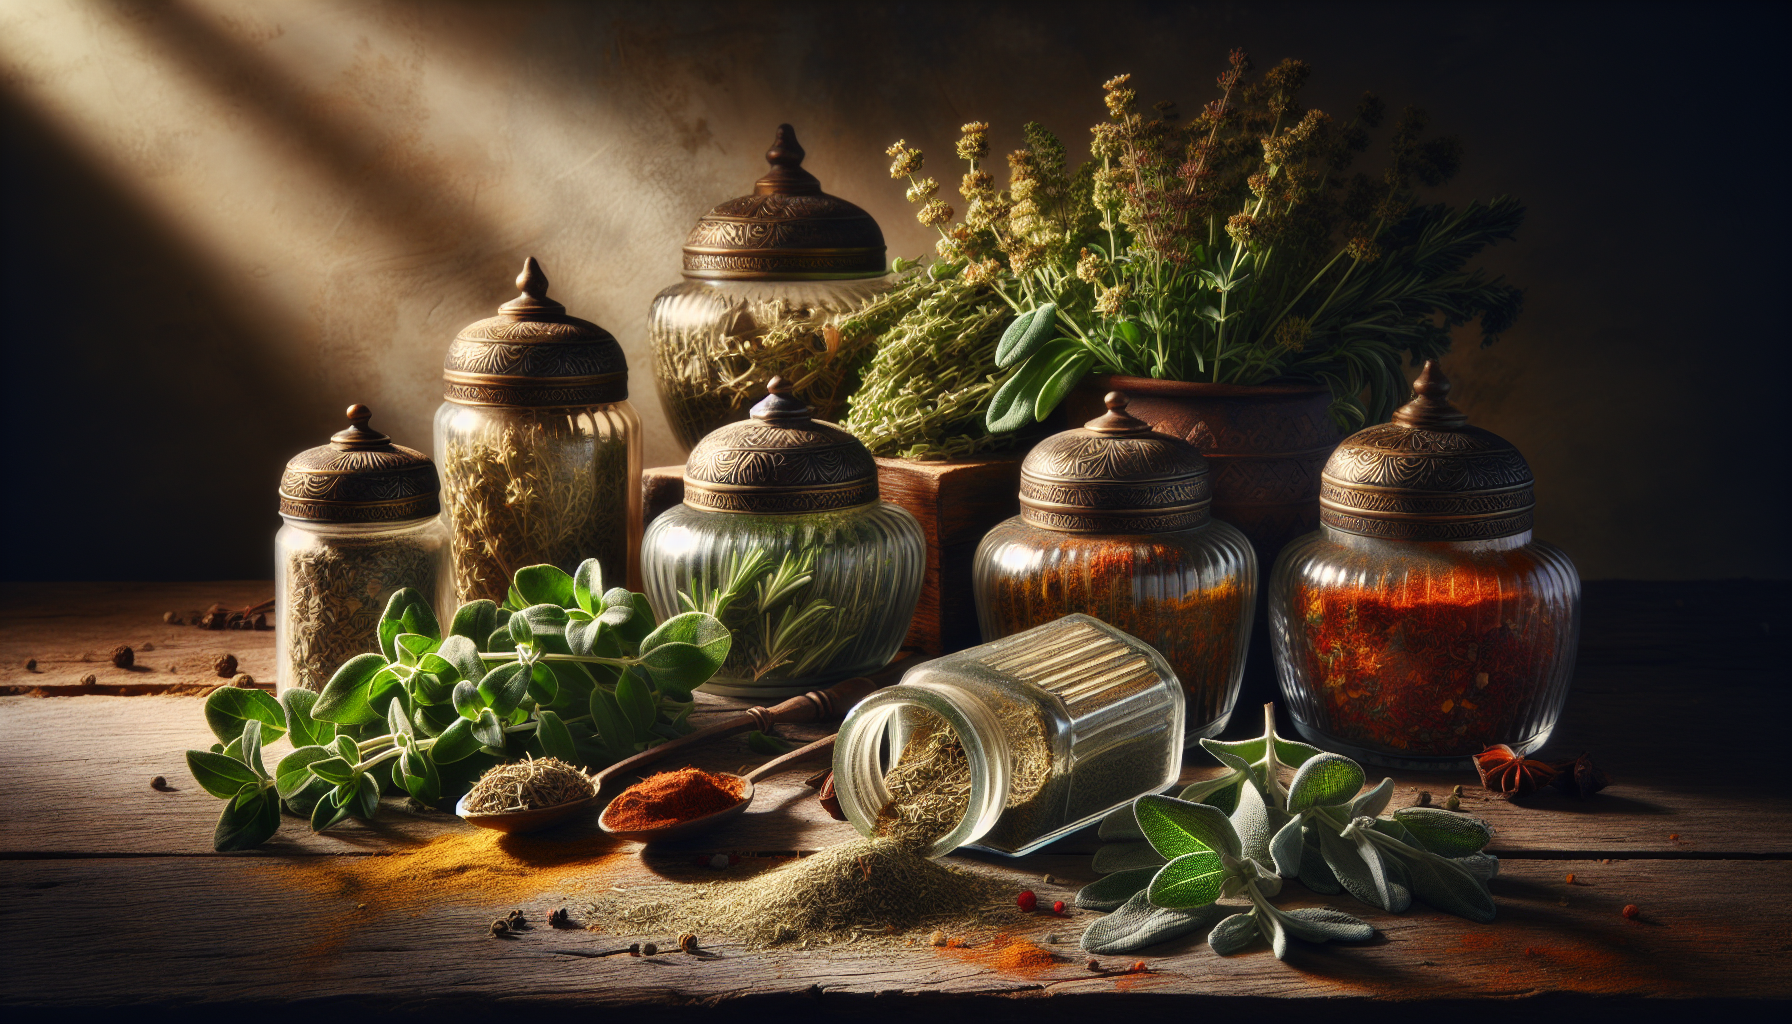 Aromatic herbs and spices arranged in a decorative manner